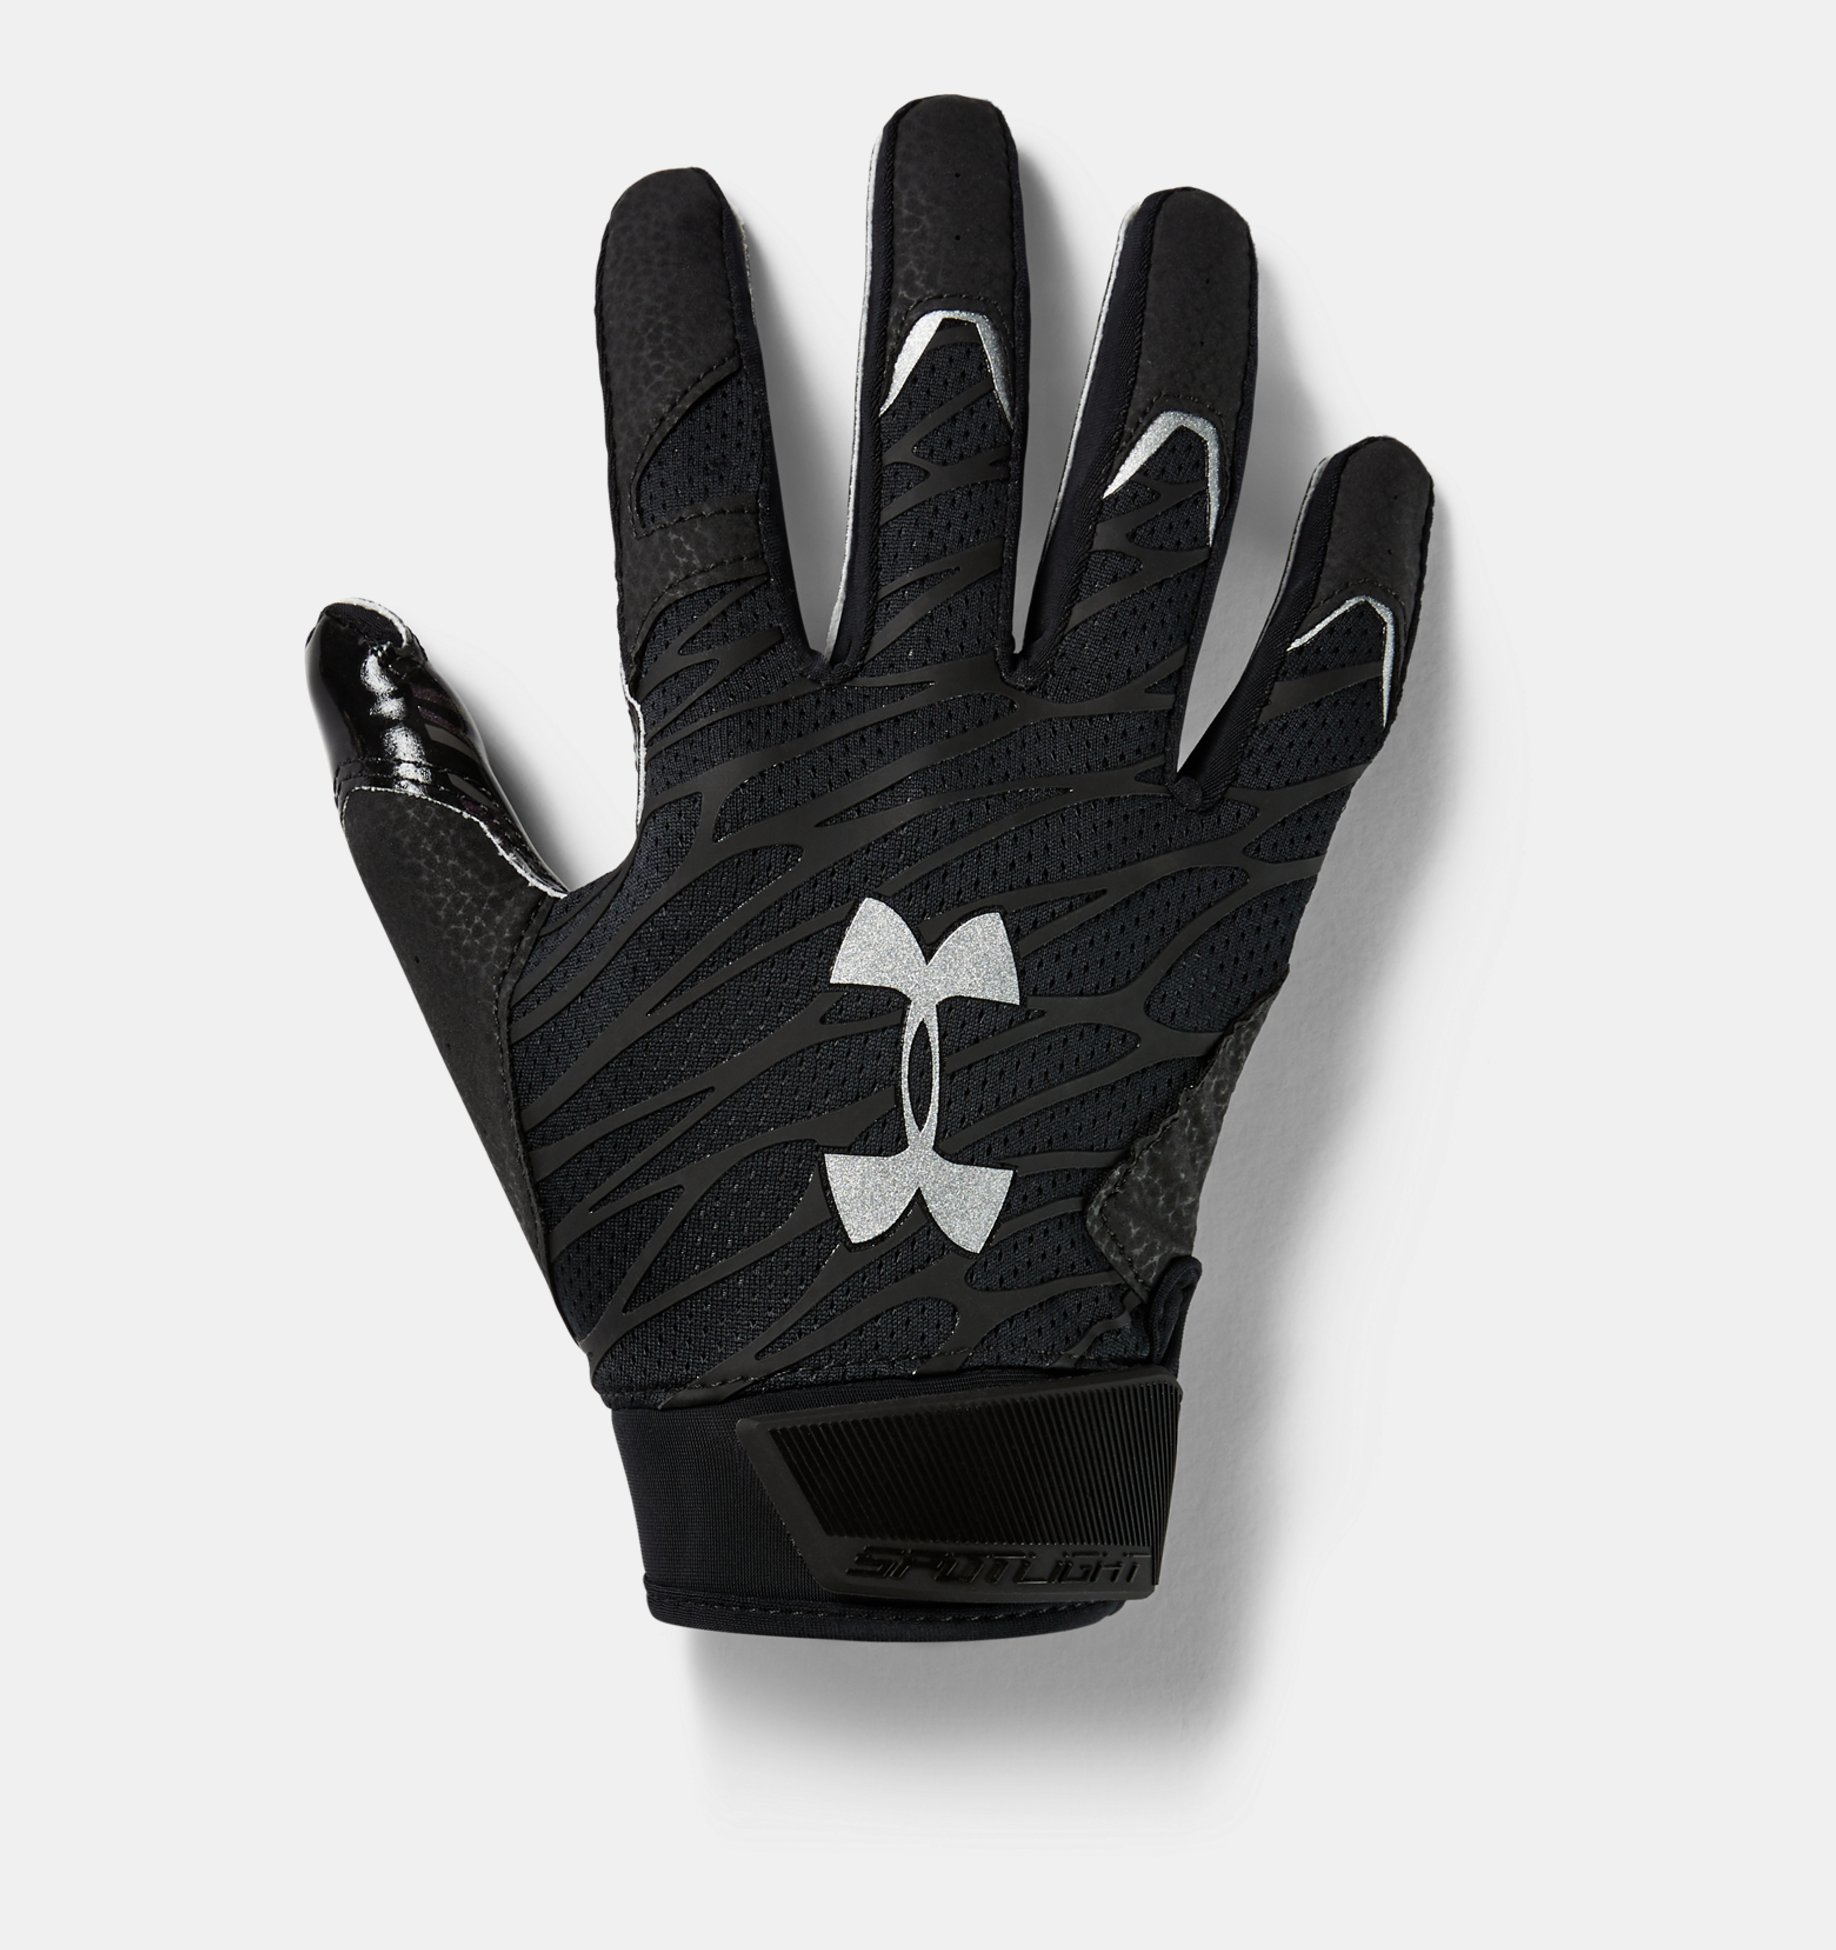 1315621-100 Details about   UA UNDER ARMOUR SPOTLIGHT LE ADULT RECEIVER FOOTBALL GLOVES NWT 